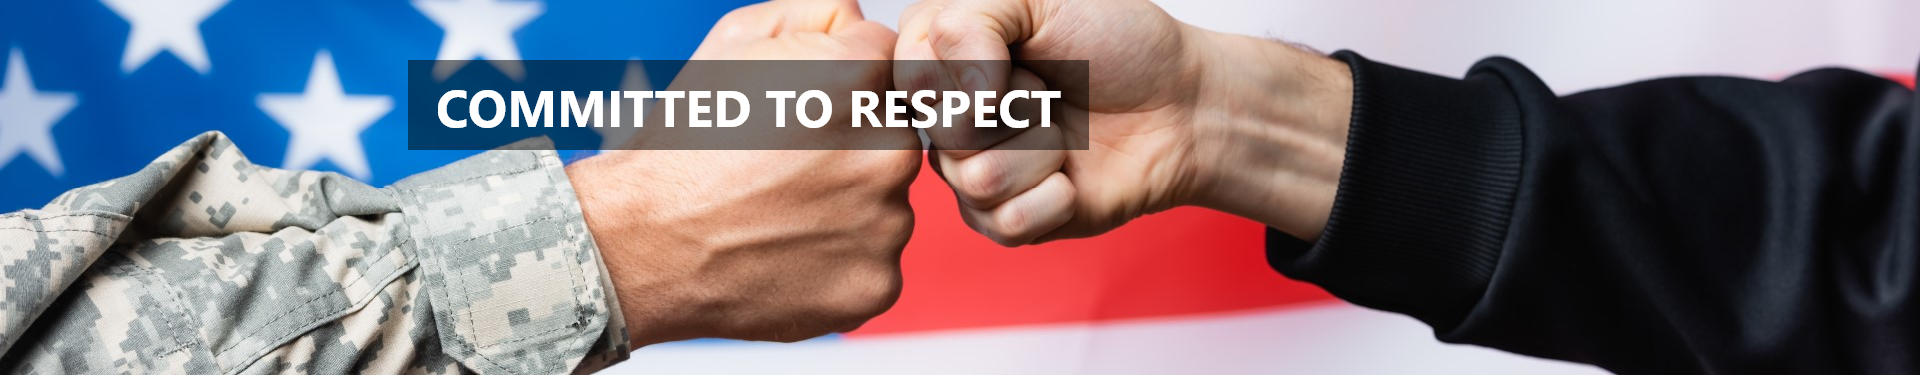  Committed to Respect